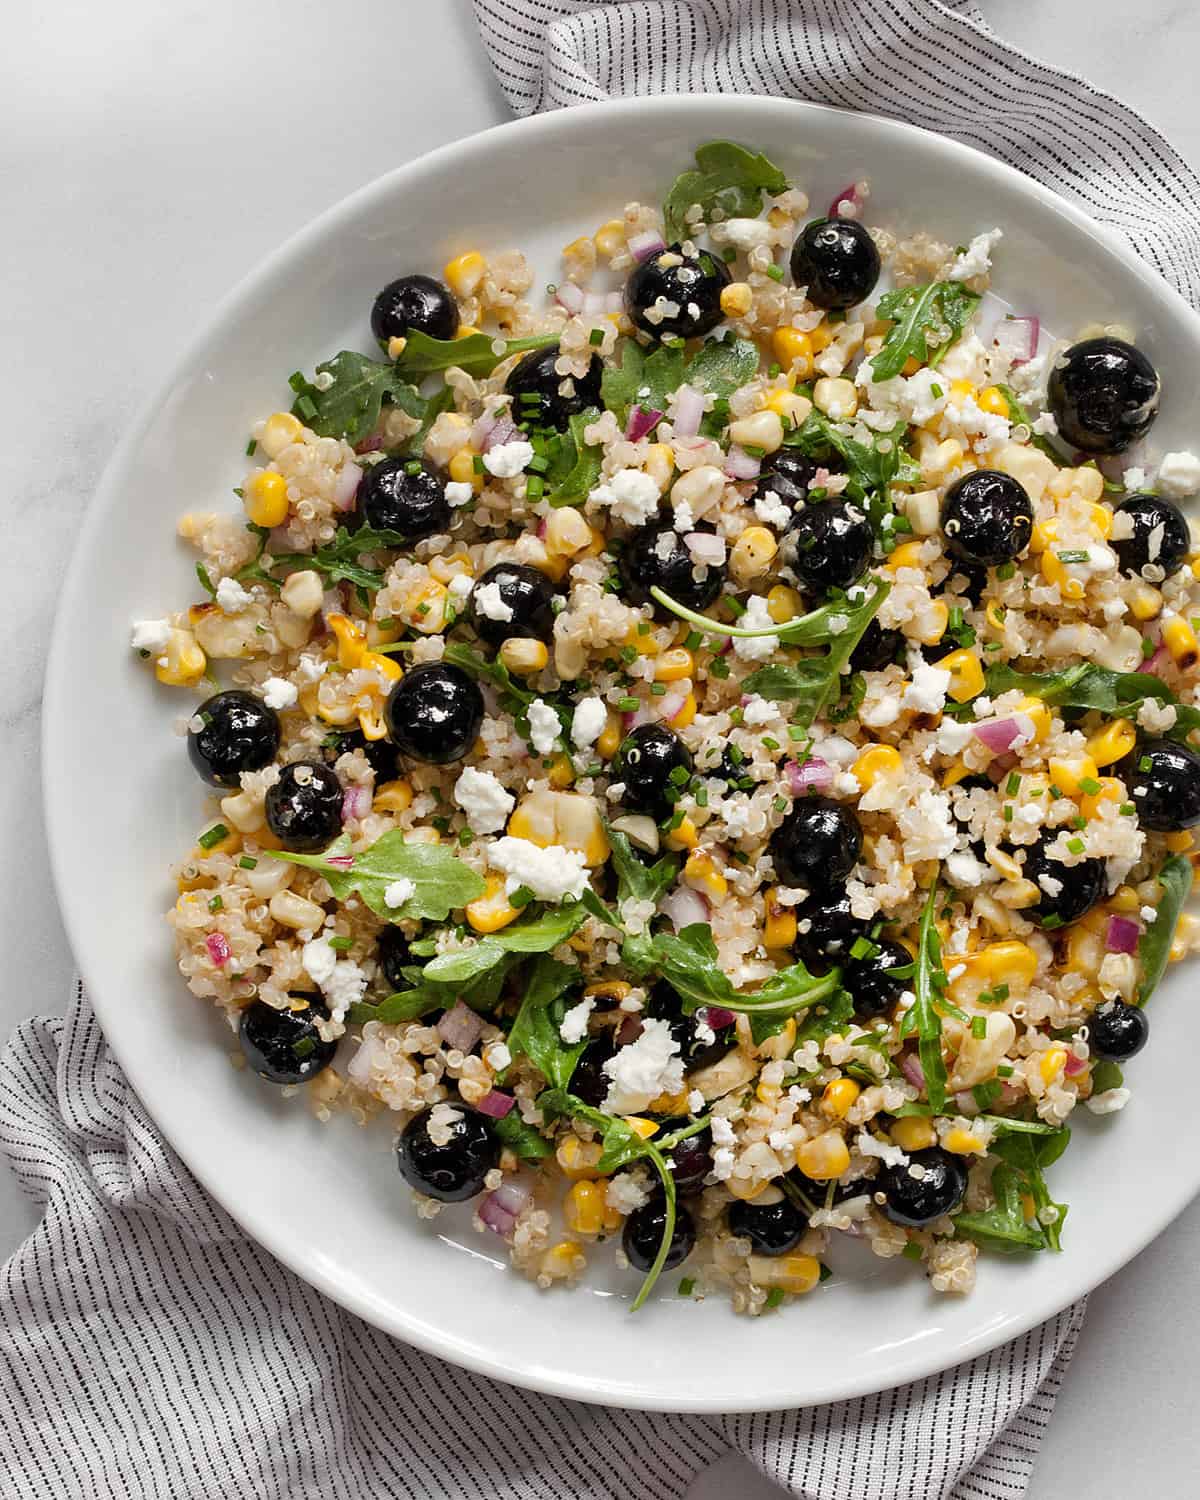 Blueberry salad with corn and quinoa on a plate.